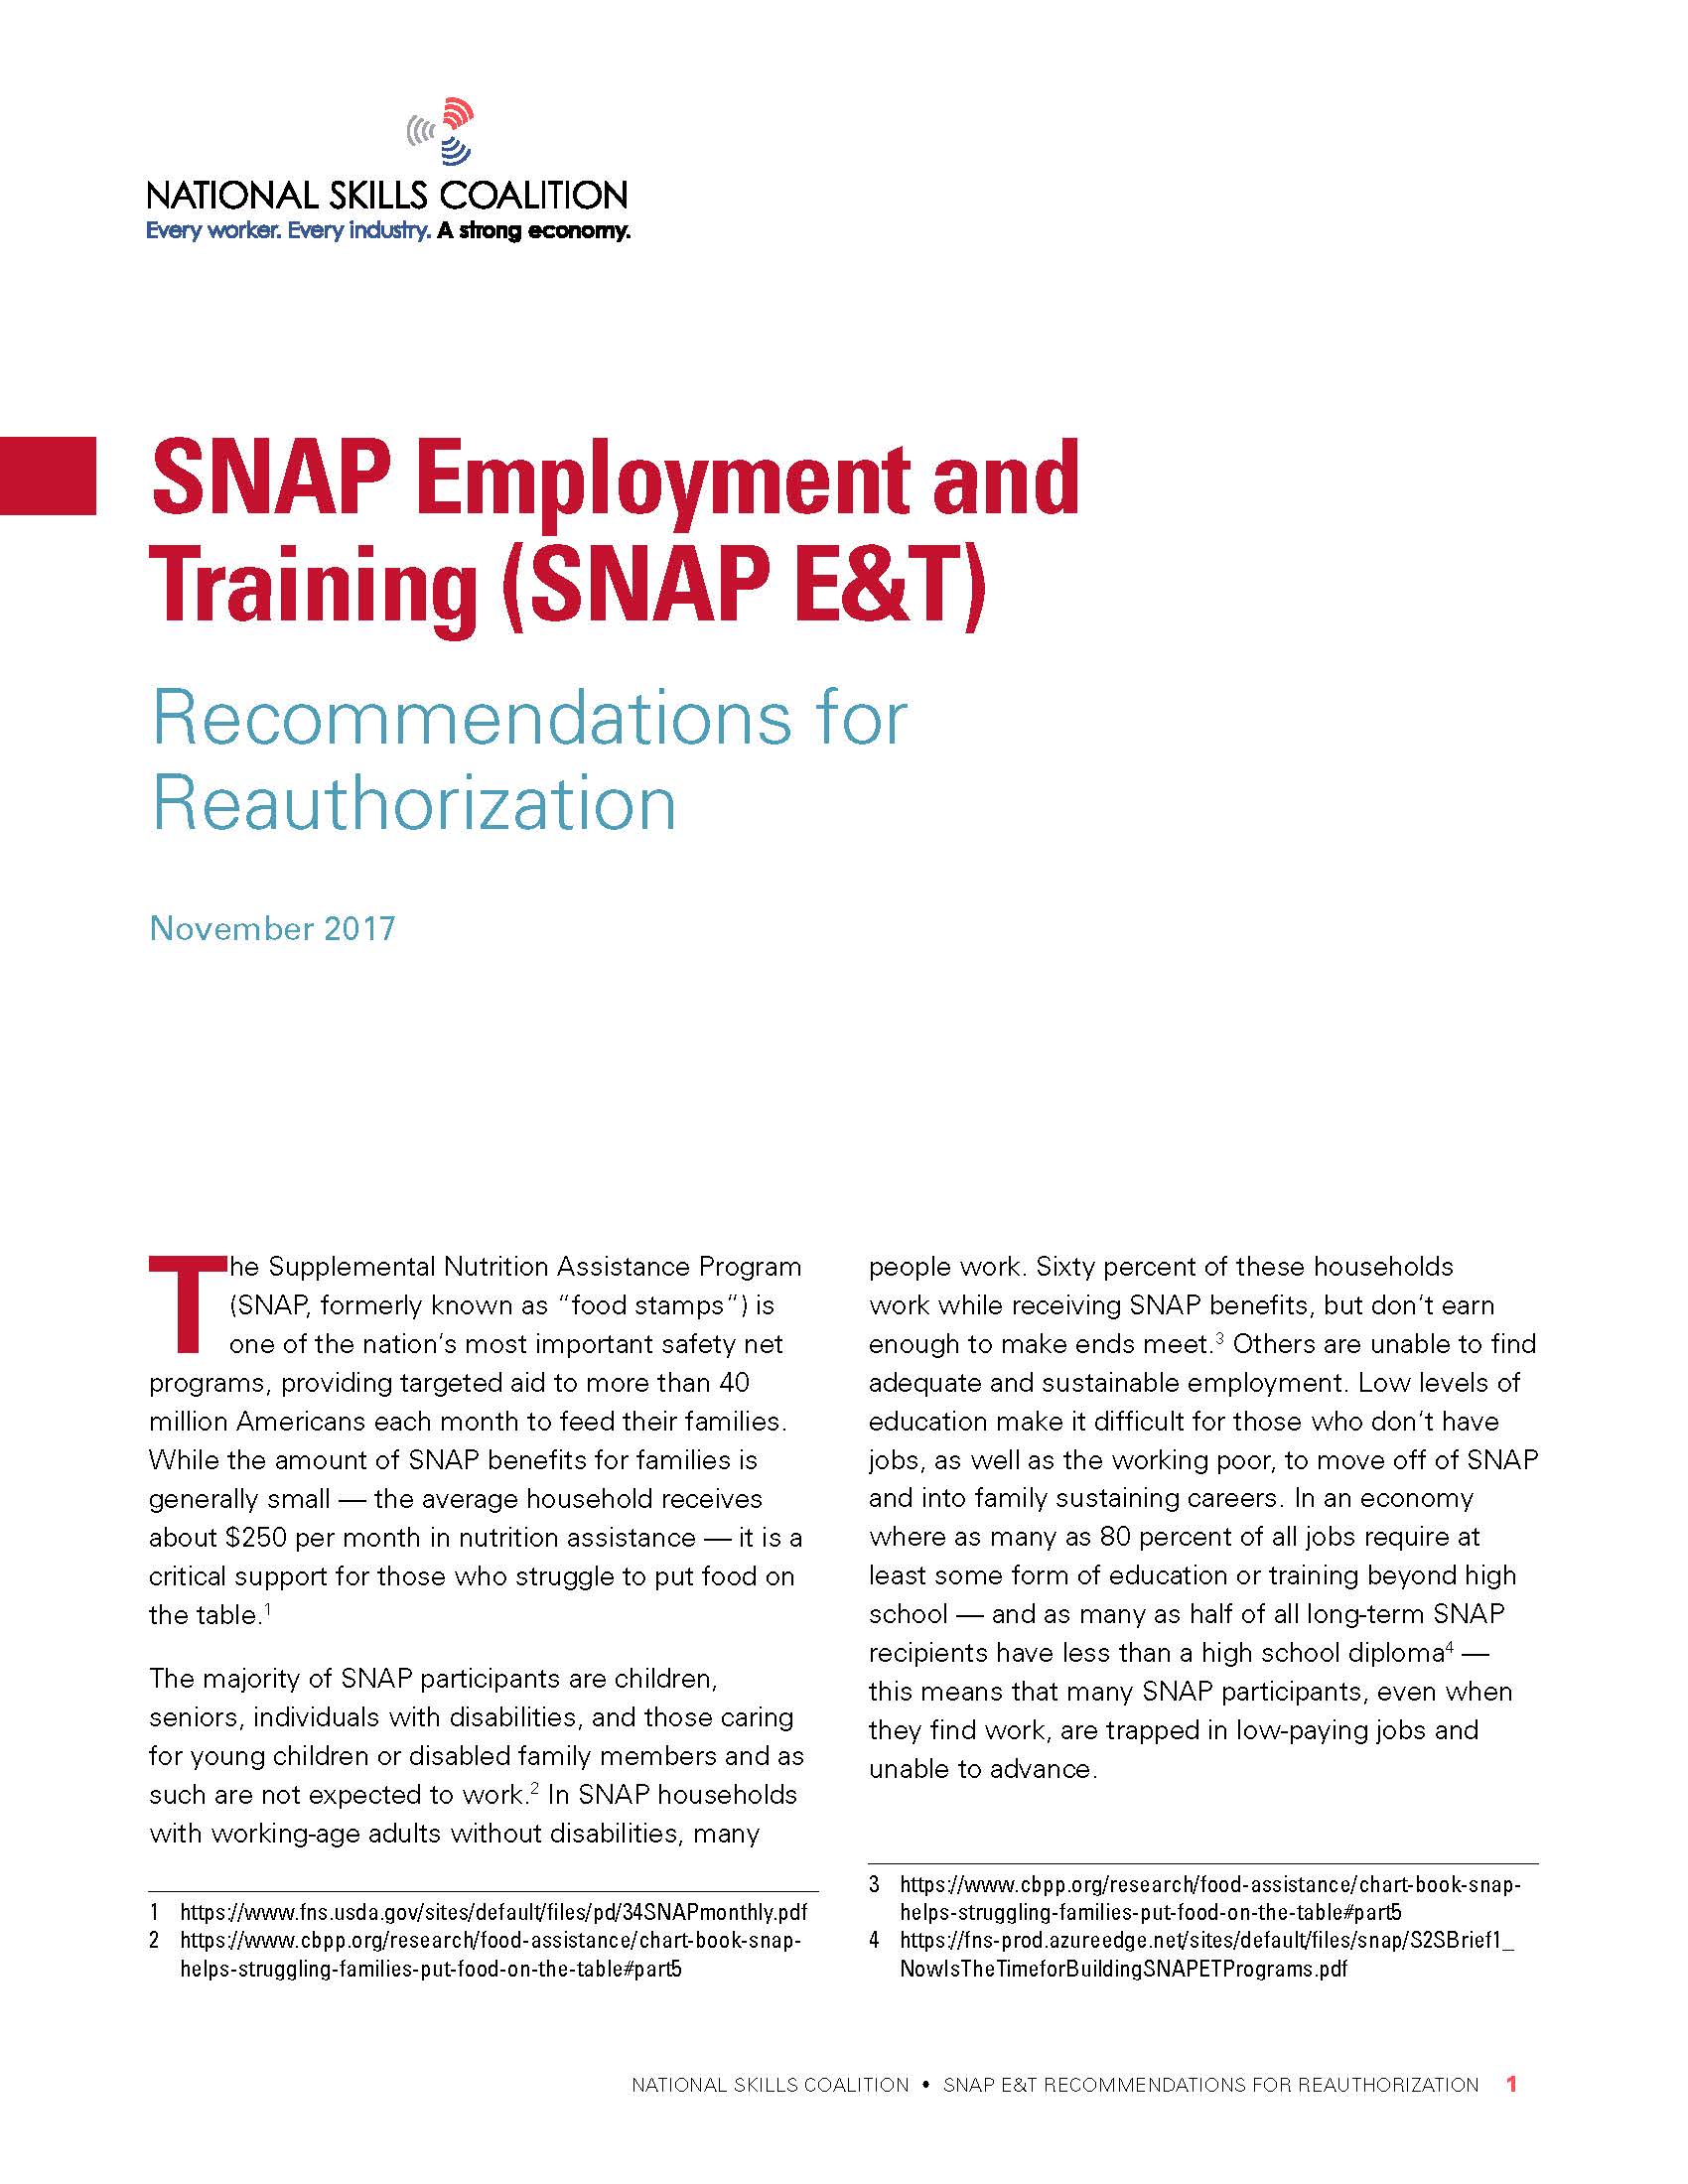 National Skills Coalition releases SNAP E&T reauthorization recommendations